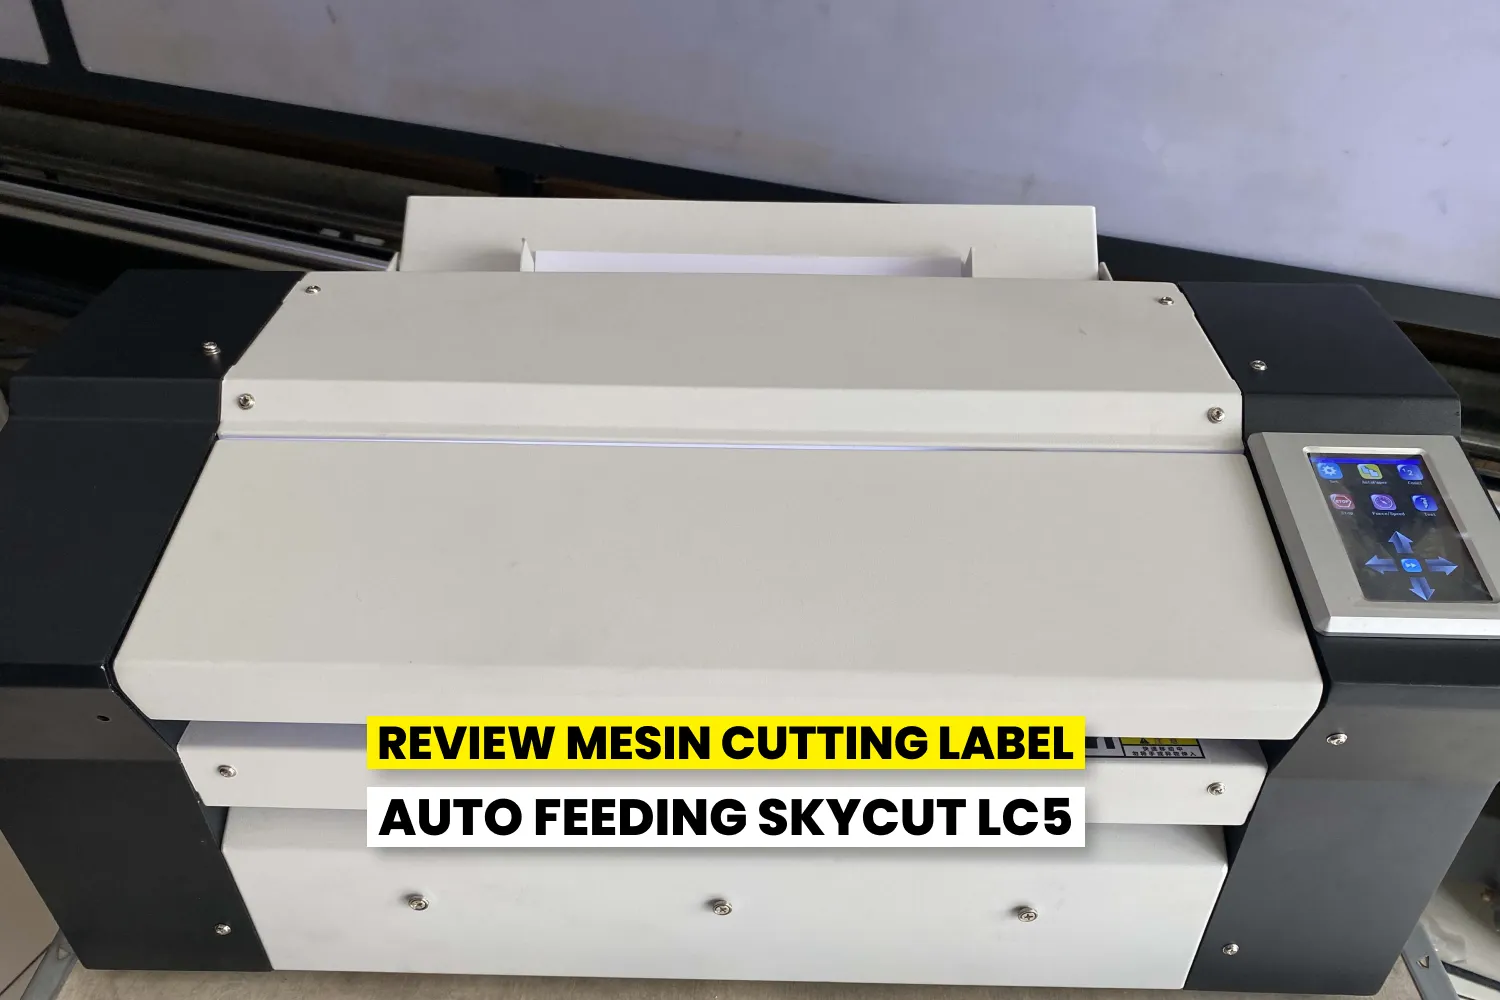 Review Mesin Cutting Label Auto-Feeding Skycut Lc5